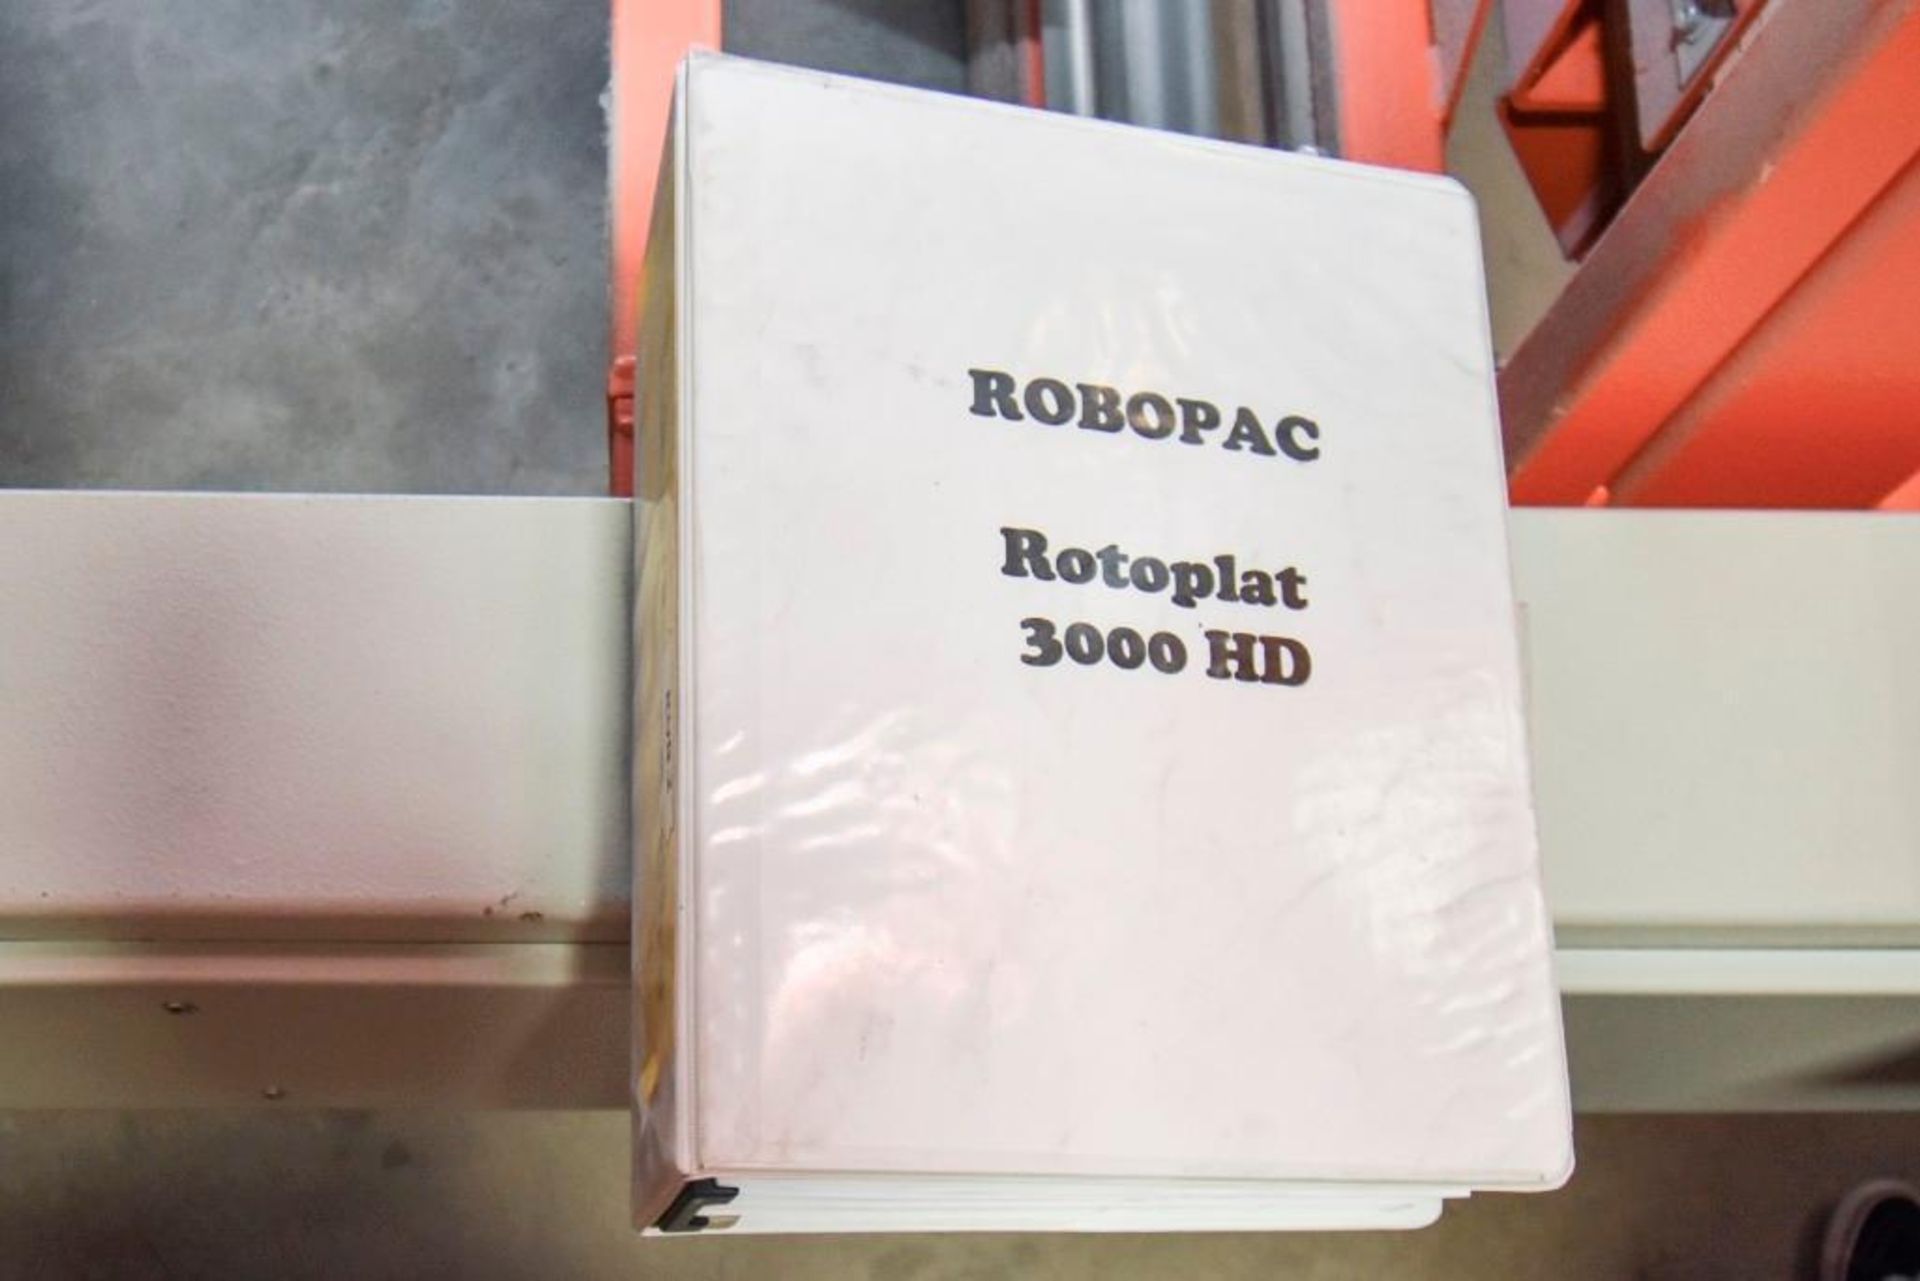 Rotoplat 3000 HD Top Inside - Image 46 of 104